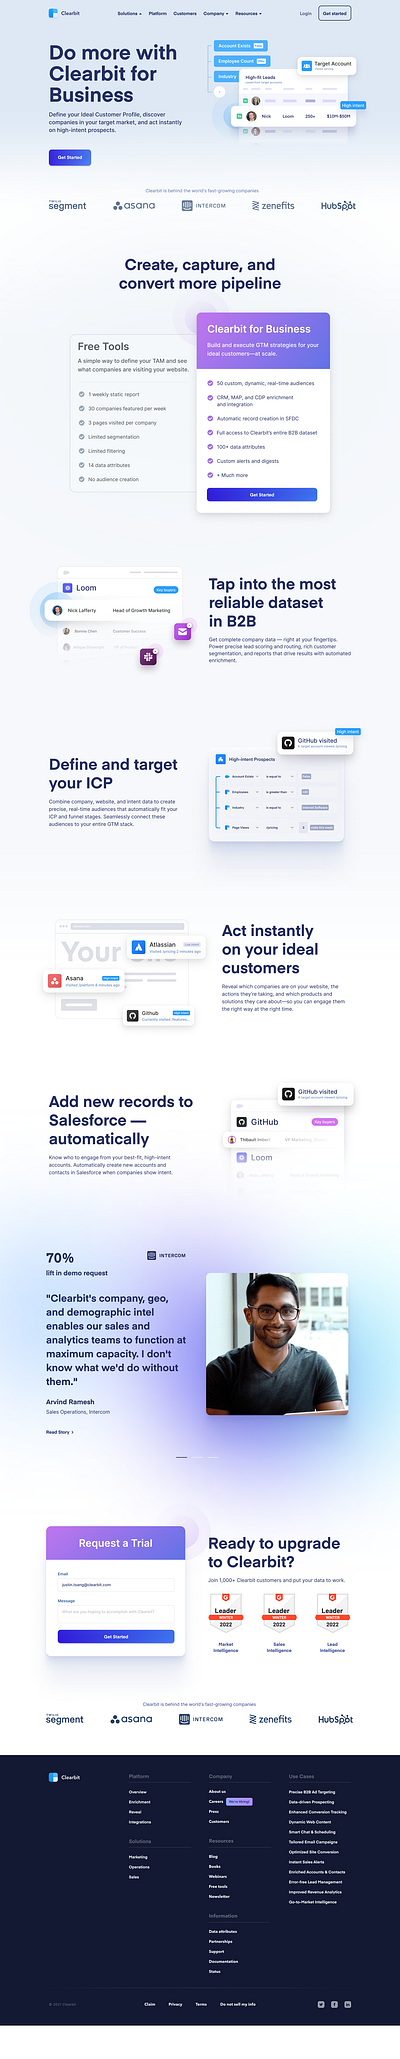 Growth tools page design - Clearbit features growth tools landing page web design